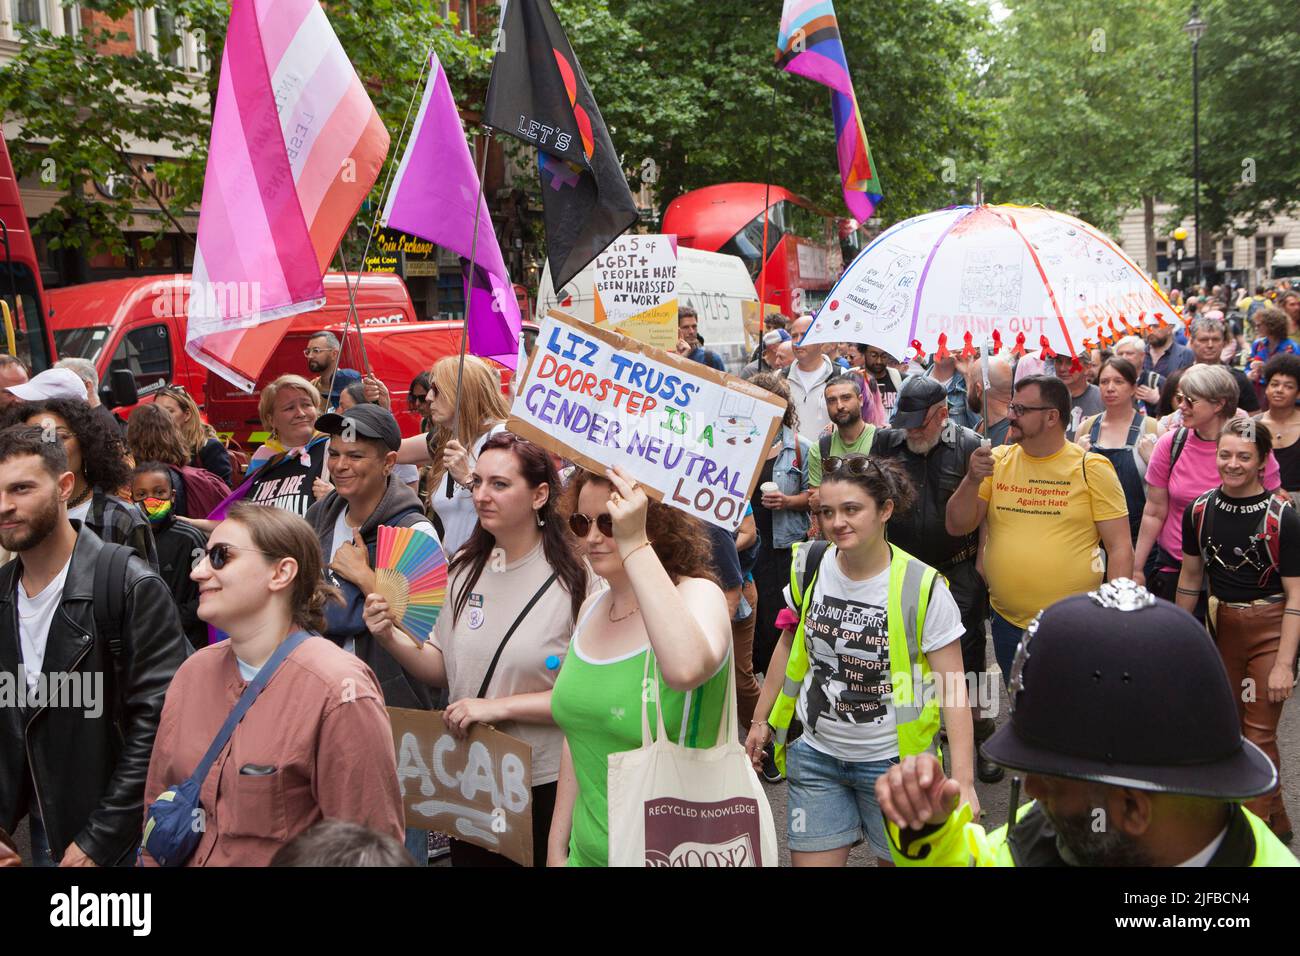 London, UK, 1 July 2022: A rally in London to mark the 50th anniversary of the first UK Pride march drew crowds who heard from veteran protesters. They marched from Trafalgar Square to Marble Arch. Protestors called for a ban on trans conversion therapy, for gay refugees to be protected, and for the fight for LGBTQIA rights to continue. Anna Watson/Alamy Live News Stock Photo